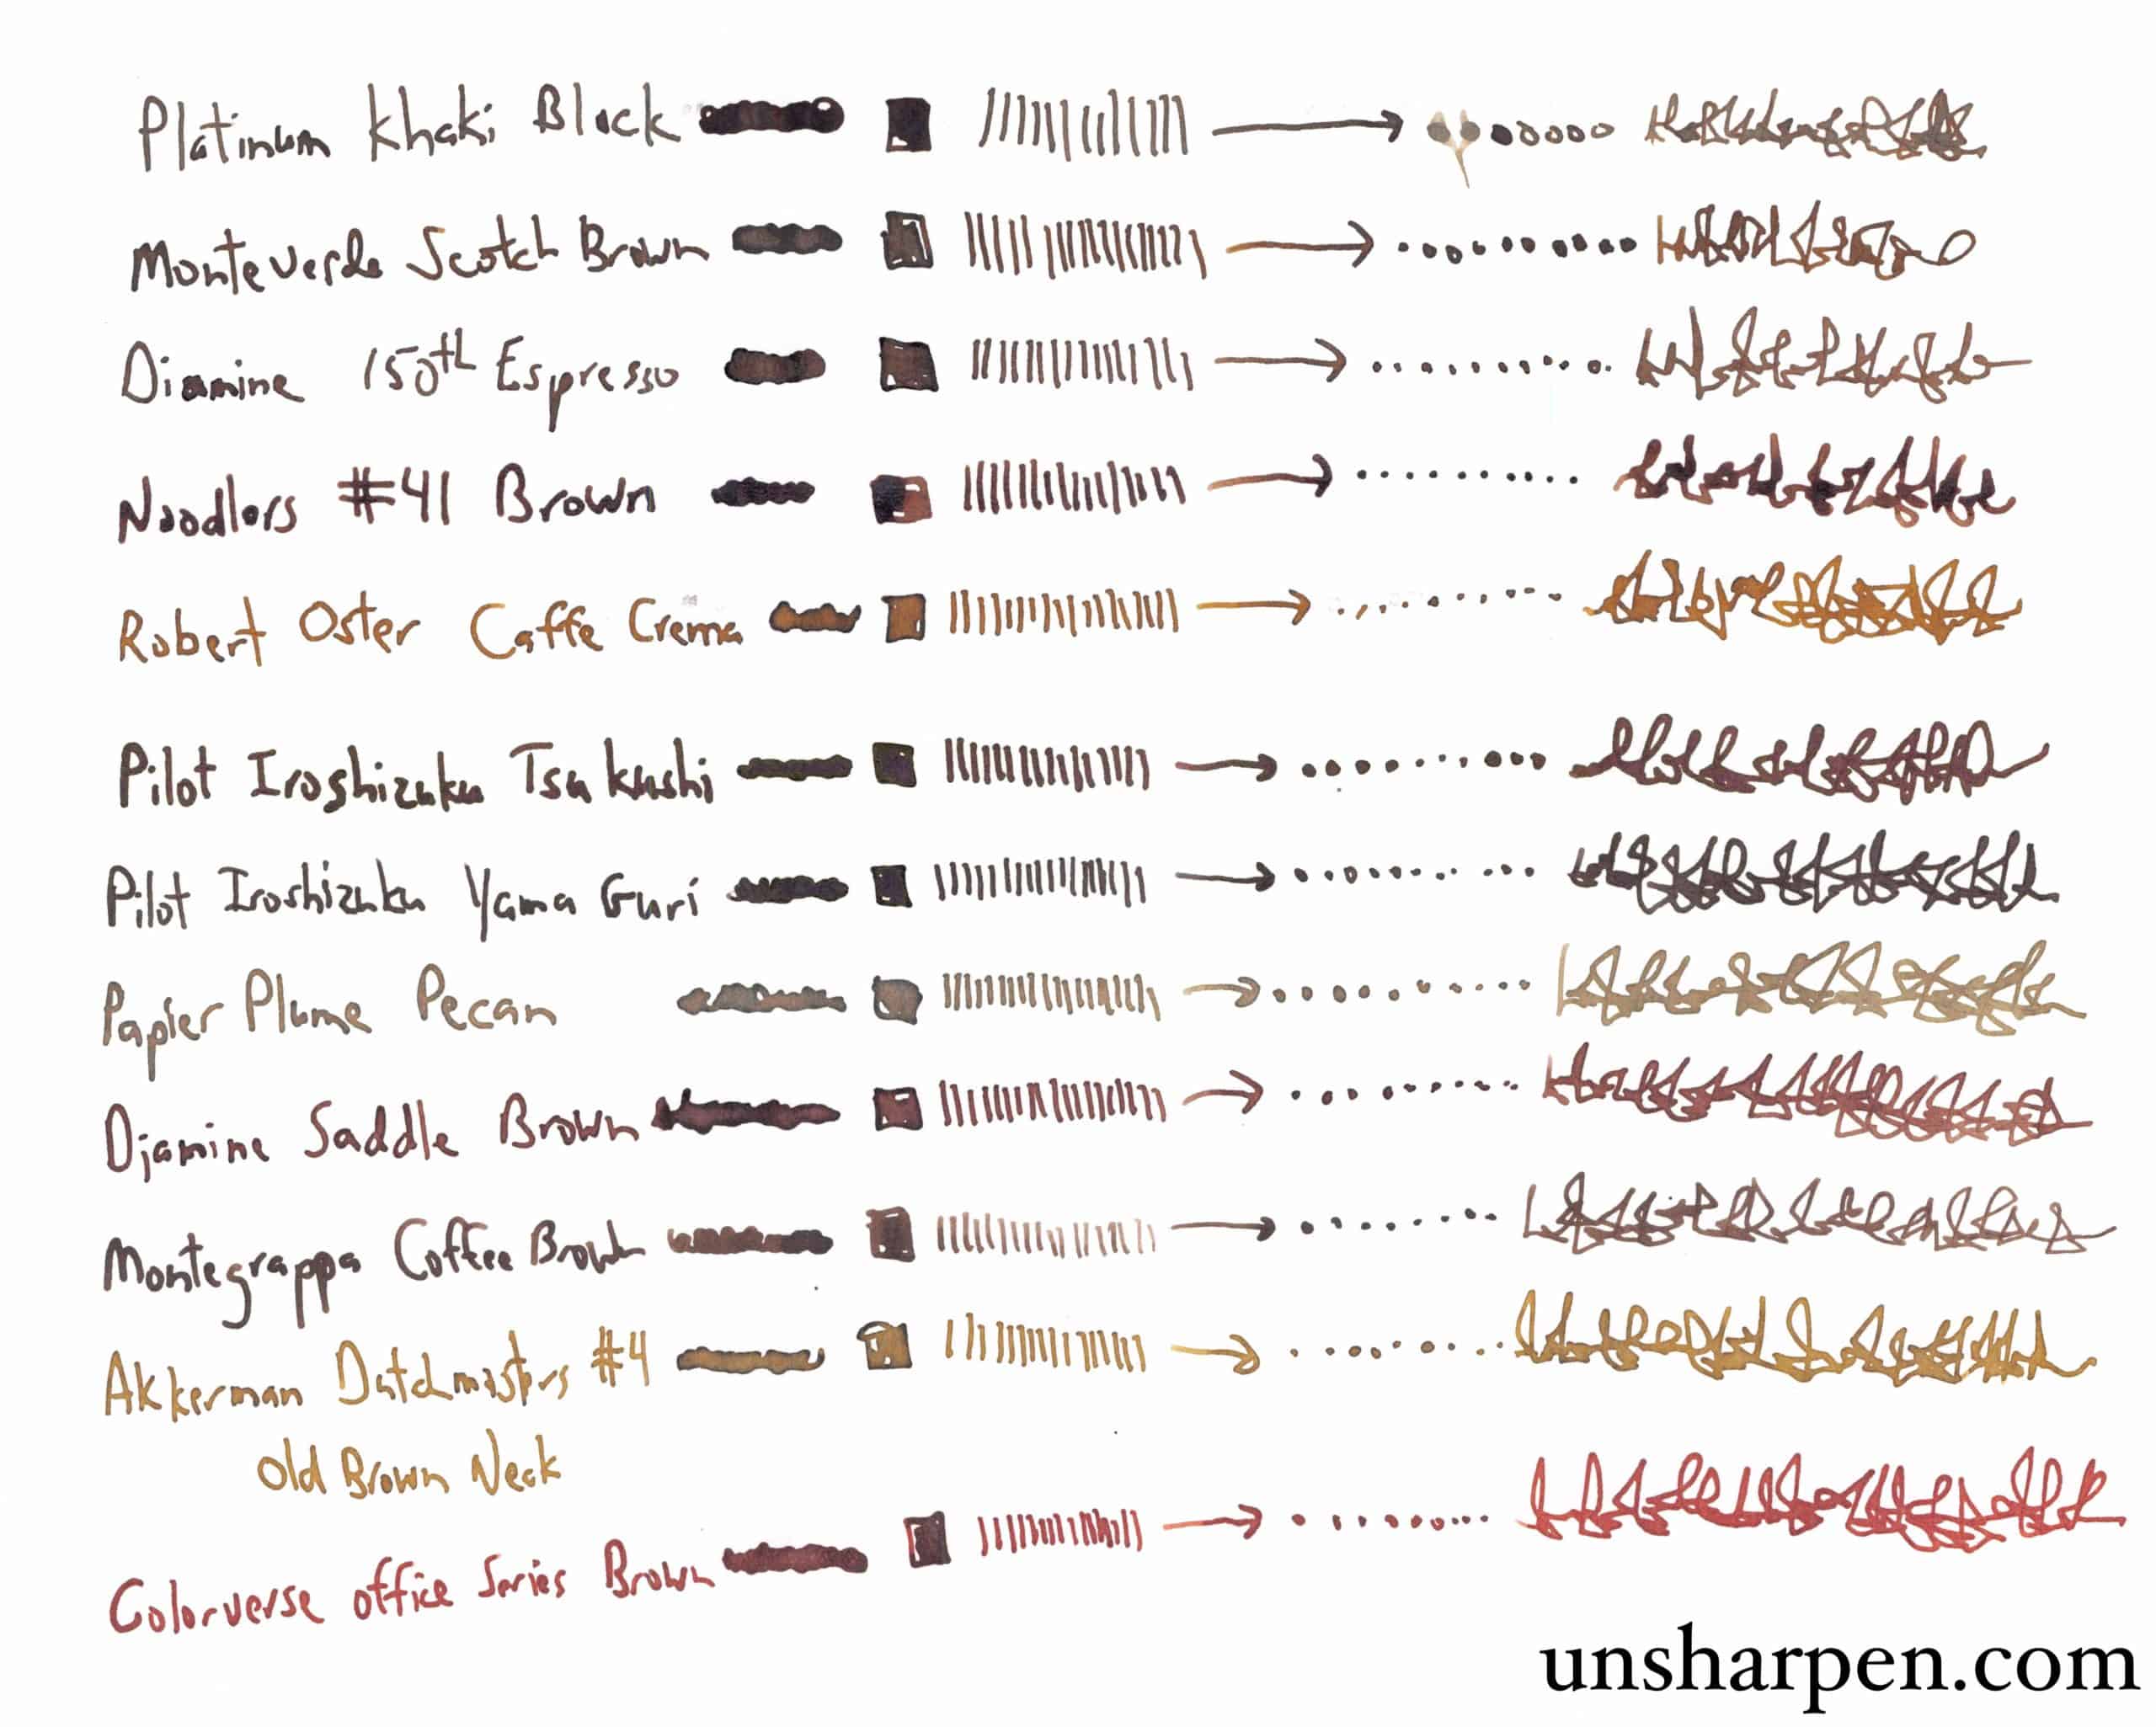 Rants of The Archer: Fountain Pen Ink Review: New Brew Inks